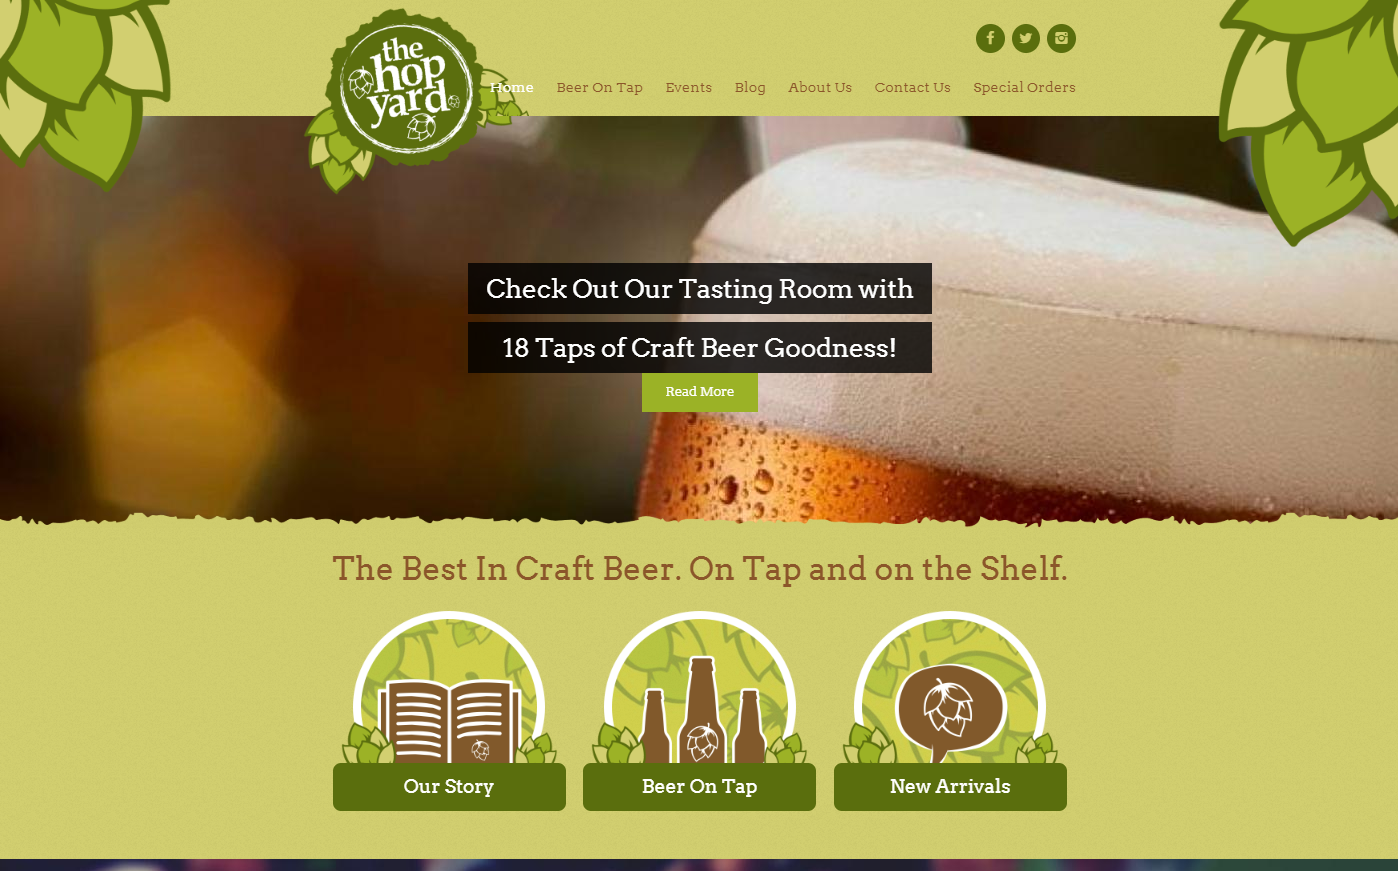 the-hop-yard-home-page-design